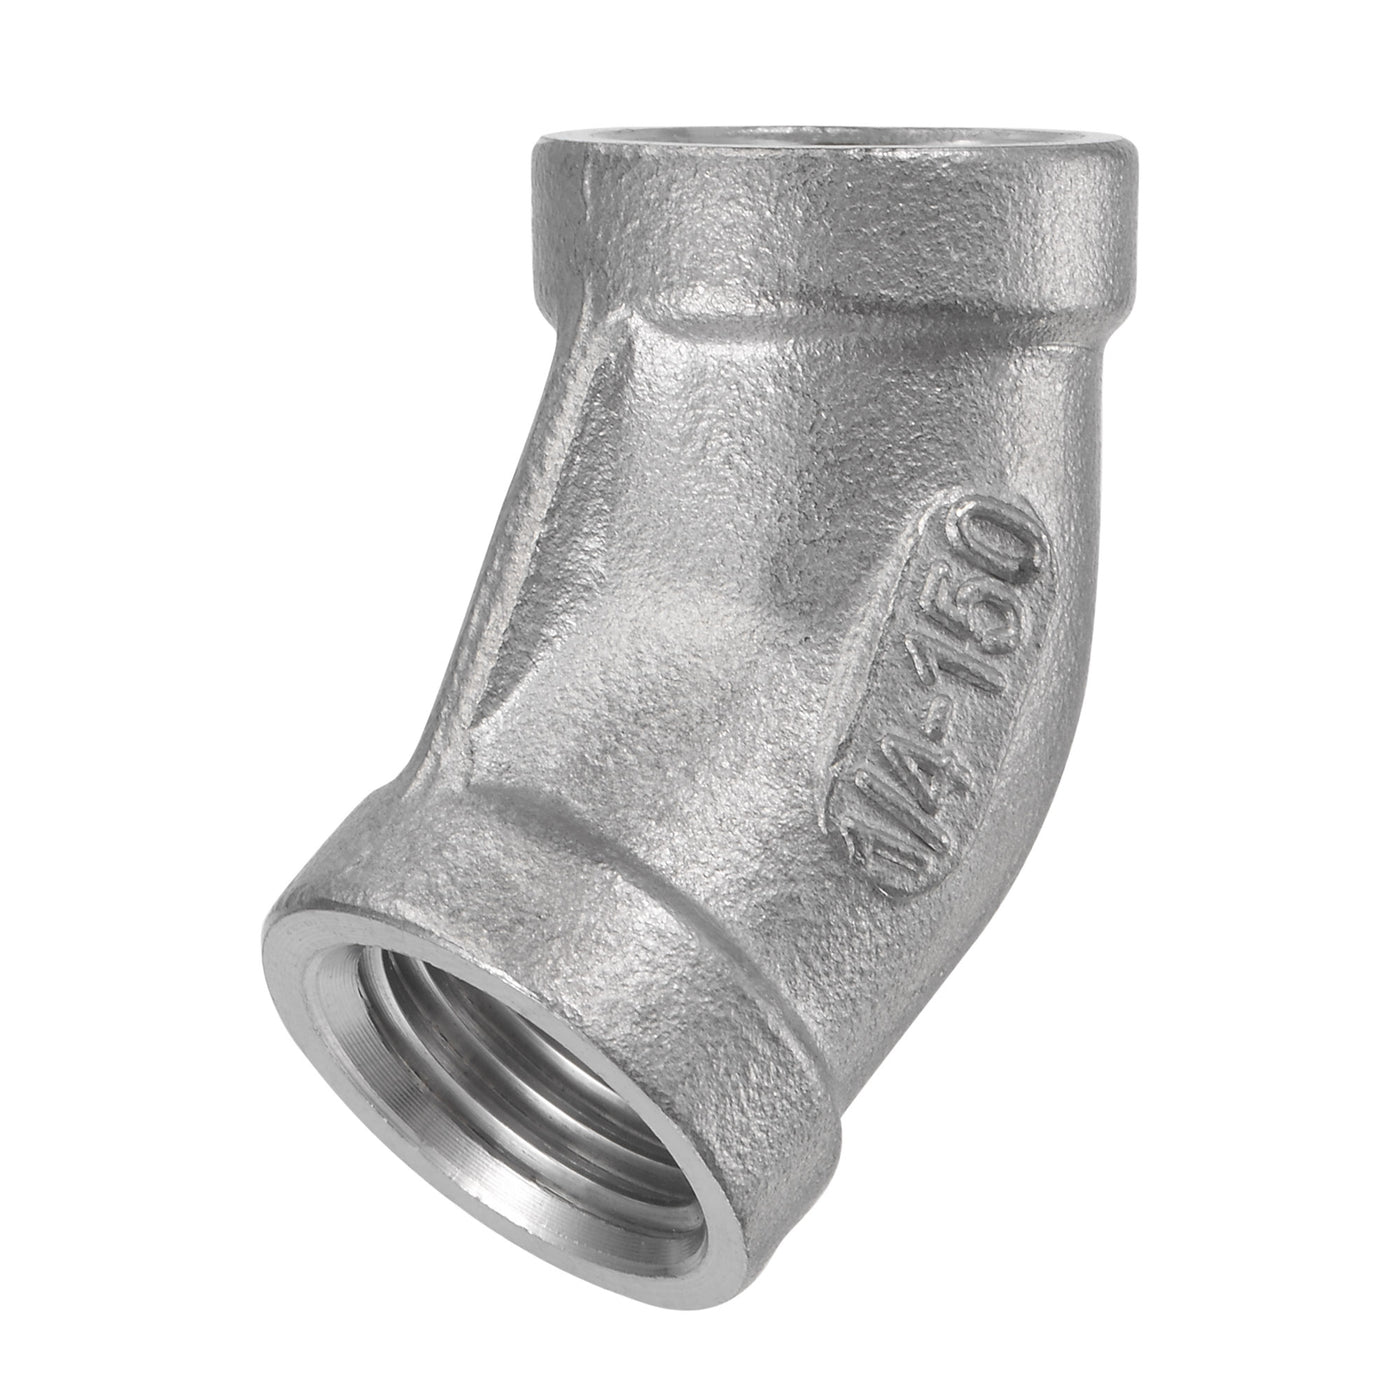 uxcell Uxcell Pipe Fitting 45 Degree Elbow NPT Female Thread Hose Connector Adapter 304 Stainless Steel